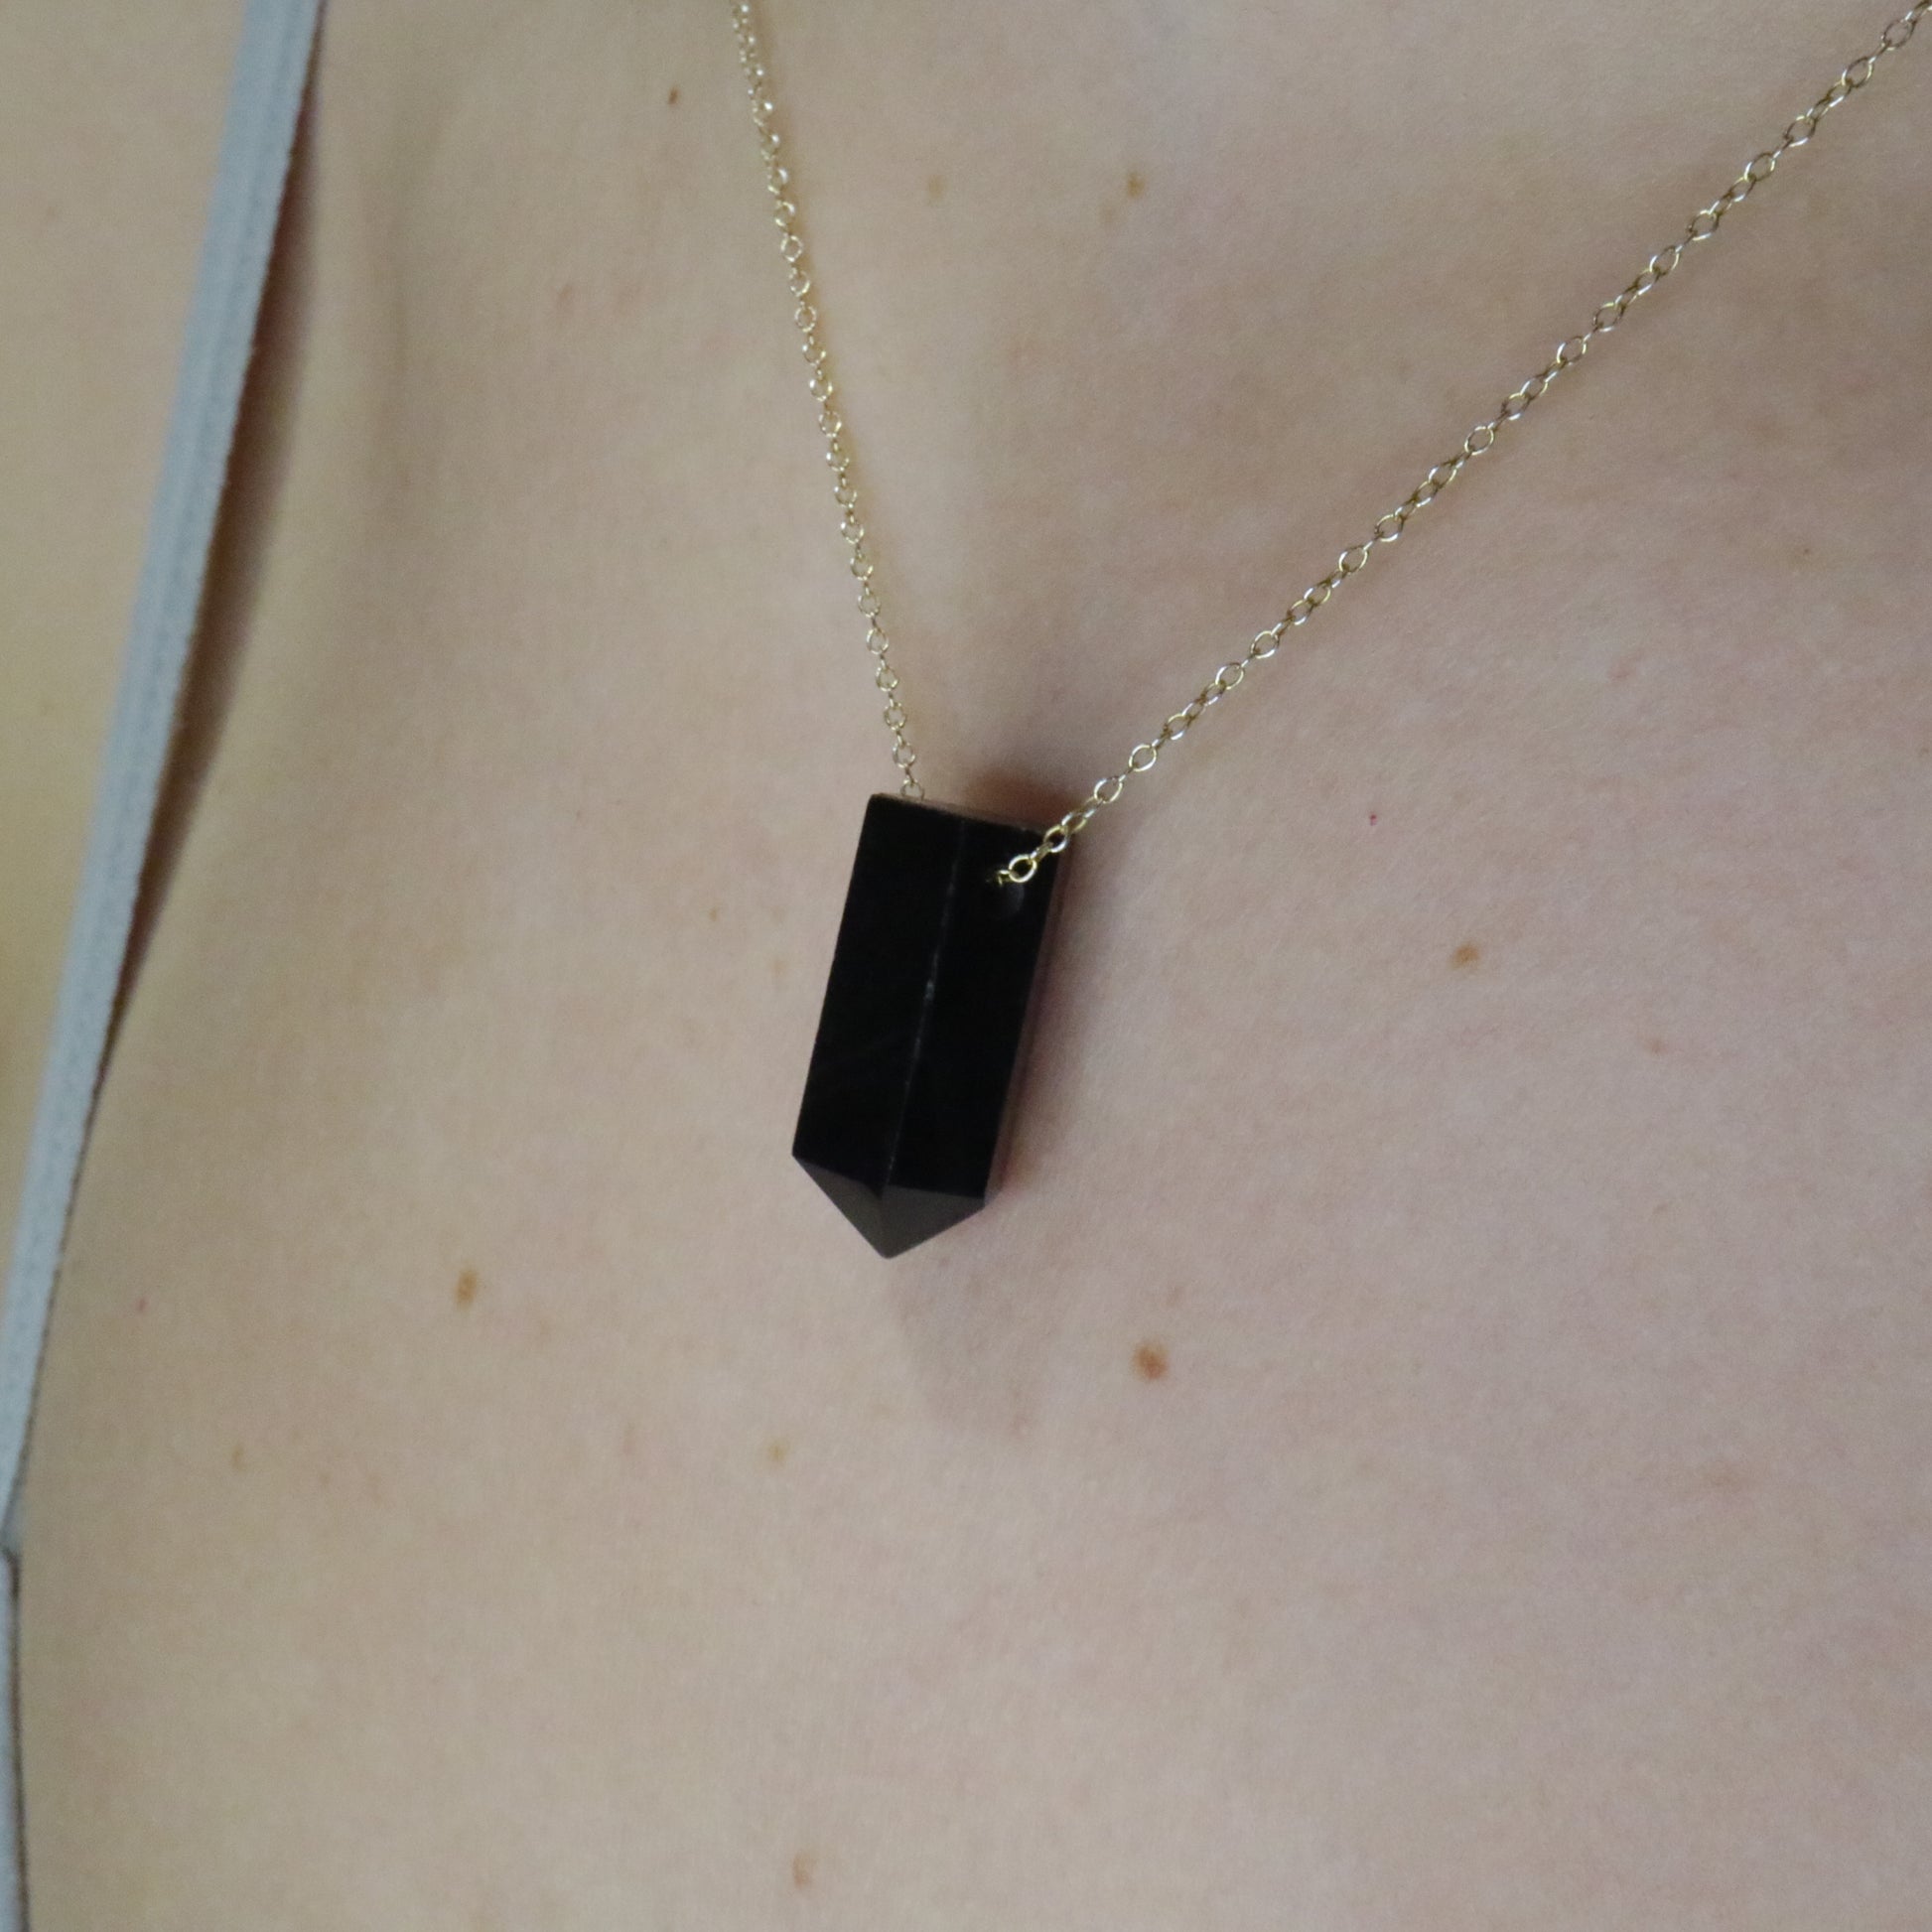 Girl wearing Black Onyx crystal necklace